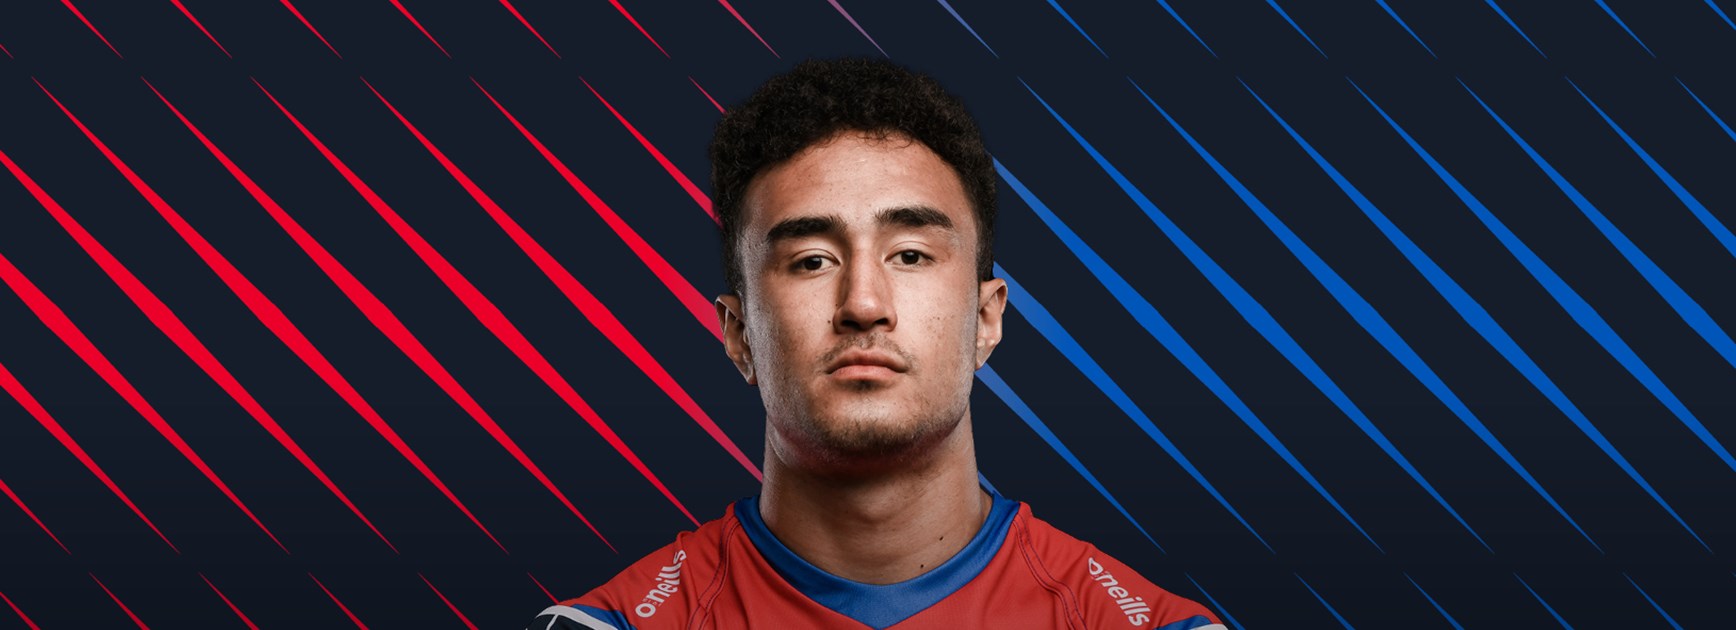 Reset and overcome: Momoisea on the verge of incredible NRL debut